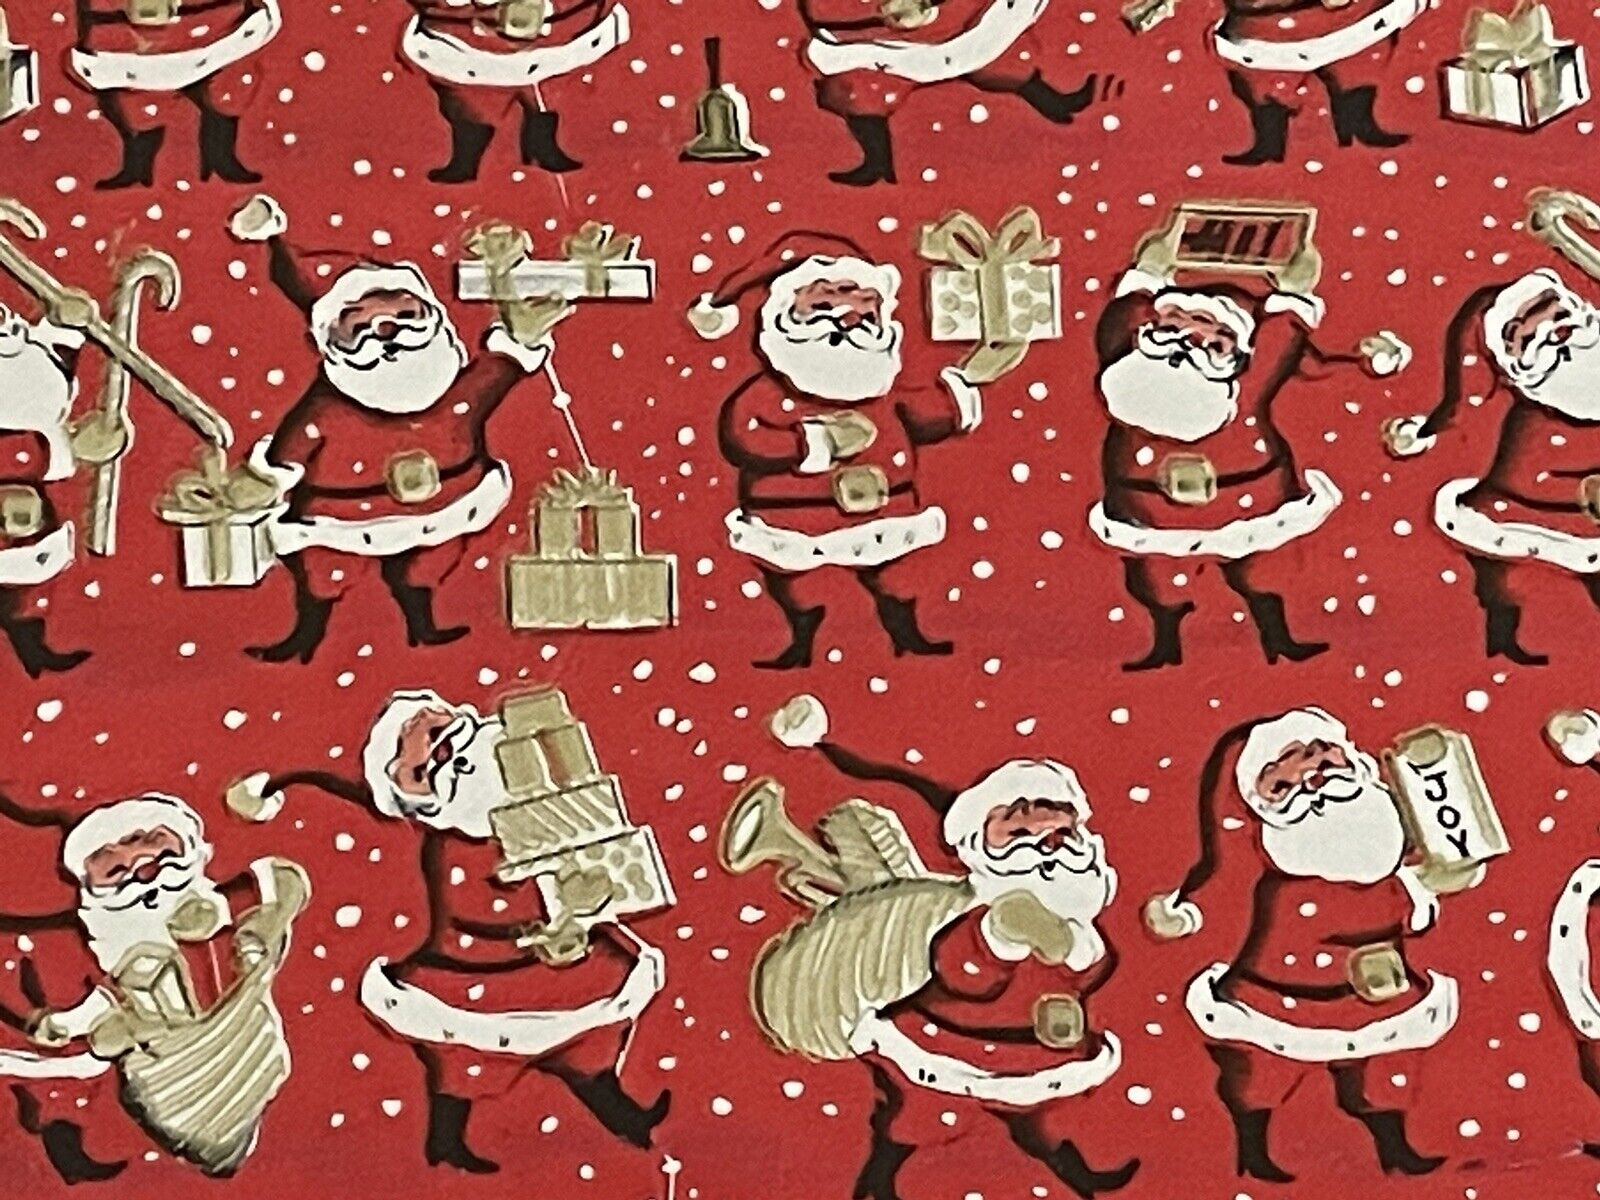 VTG CHRISTMAS WRAPPING PAPER GIFT WRAP CUTE SANTAS WITH PRESENTS ON RED